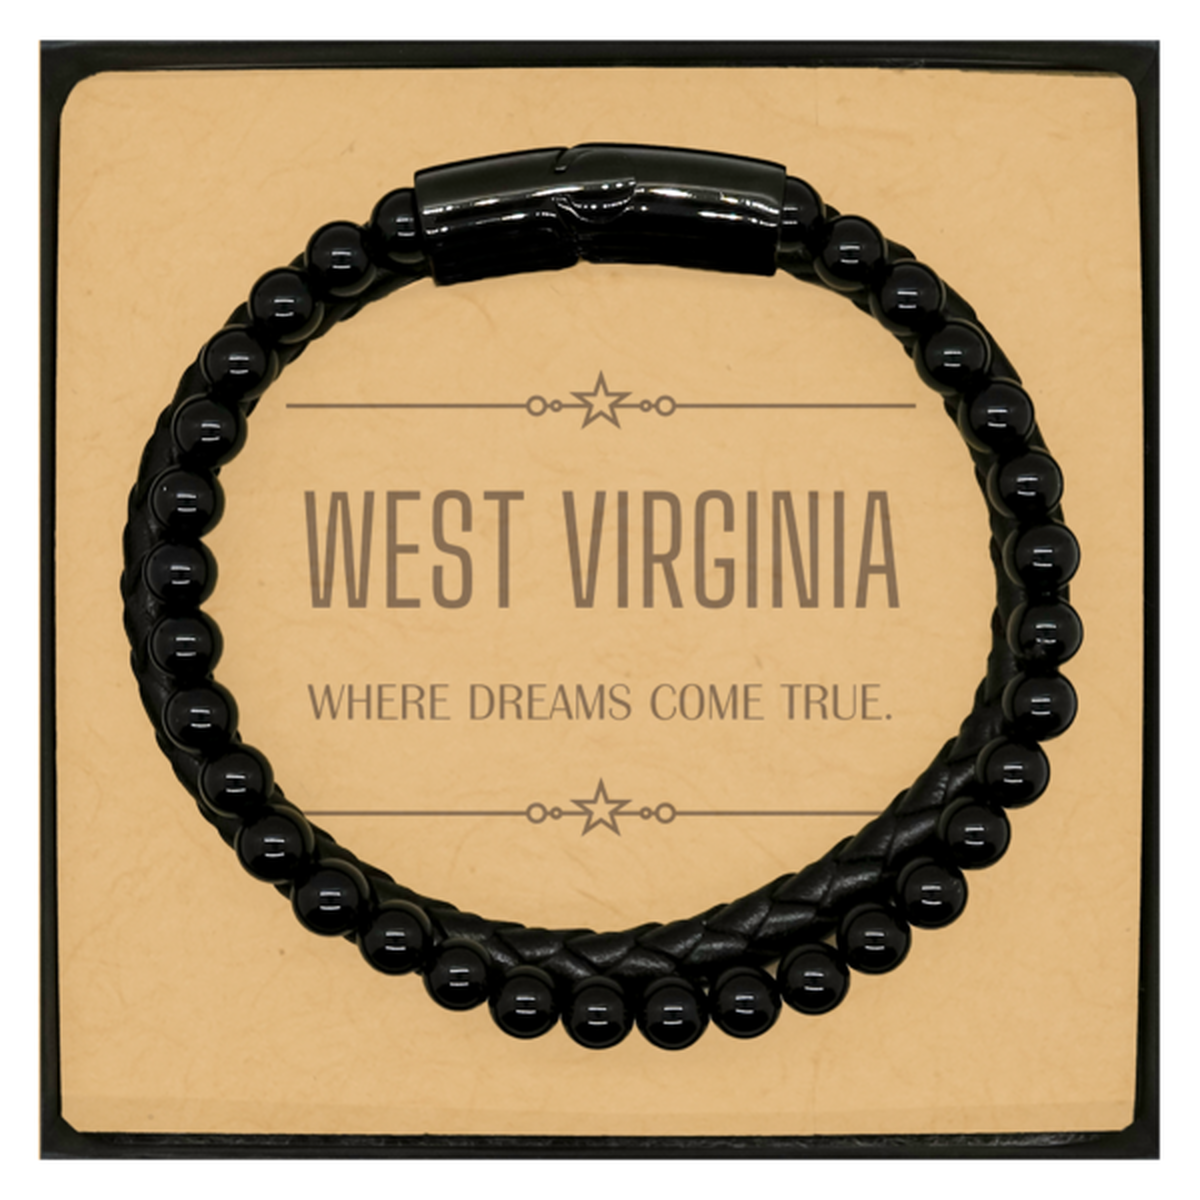 Love West Virginia State Stone Leather Bracelets, West Virginia Where dreams come true, Birthday Christmas Inspirational Gifts For West Virginia Men, Women, Friends